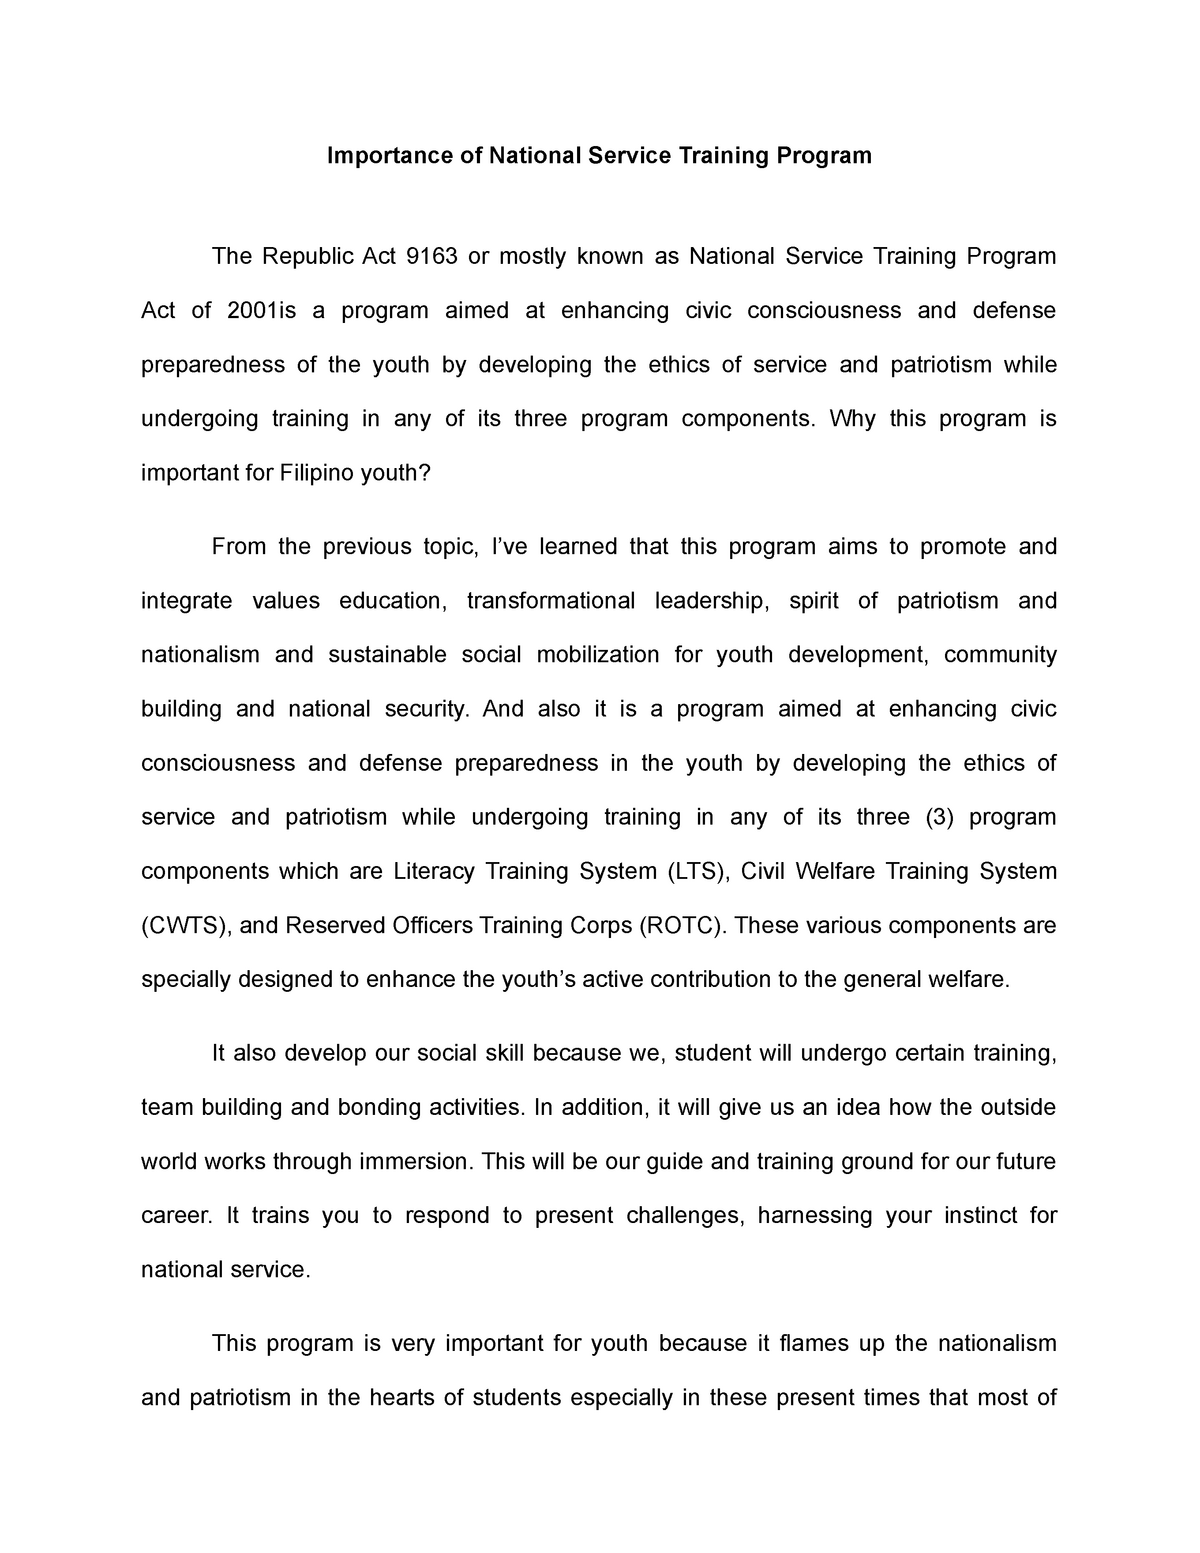 what is national service training program essay